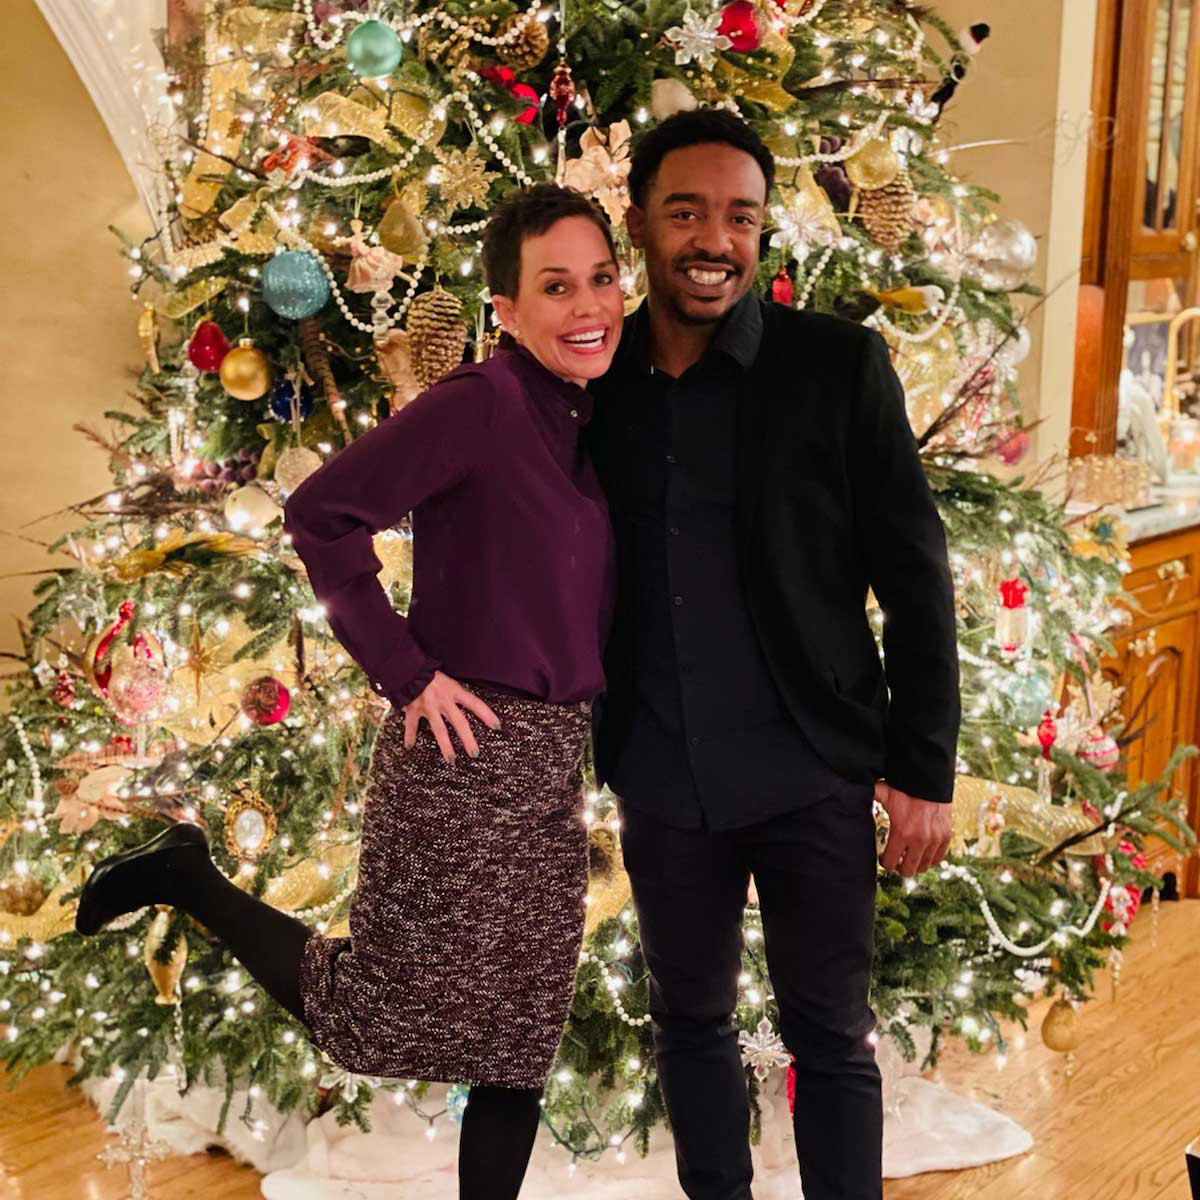 Kim Henderson and Maurice Mouzon Jr. wearing formal attire and posing in front of a Christmas tree